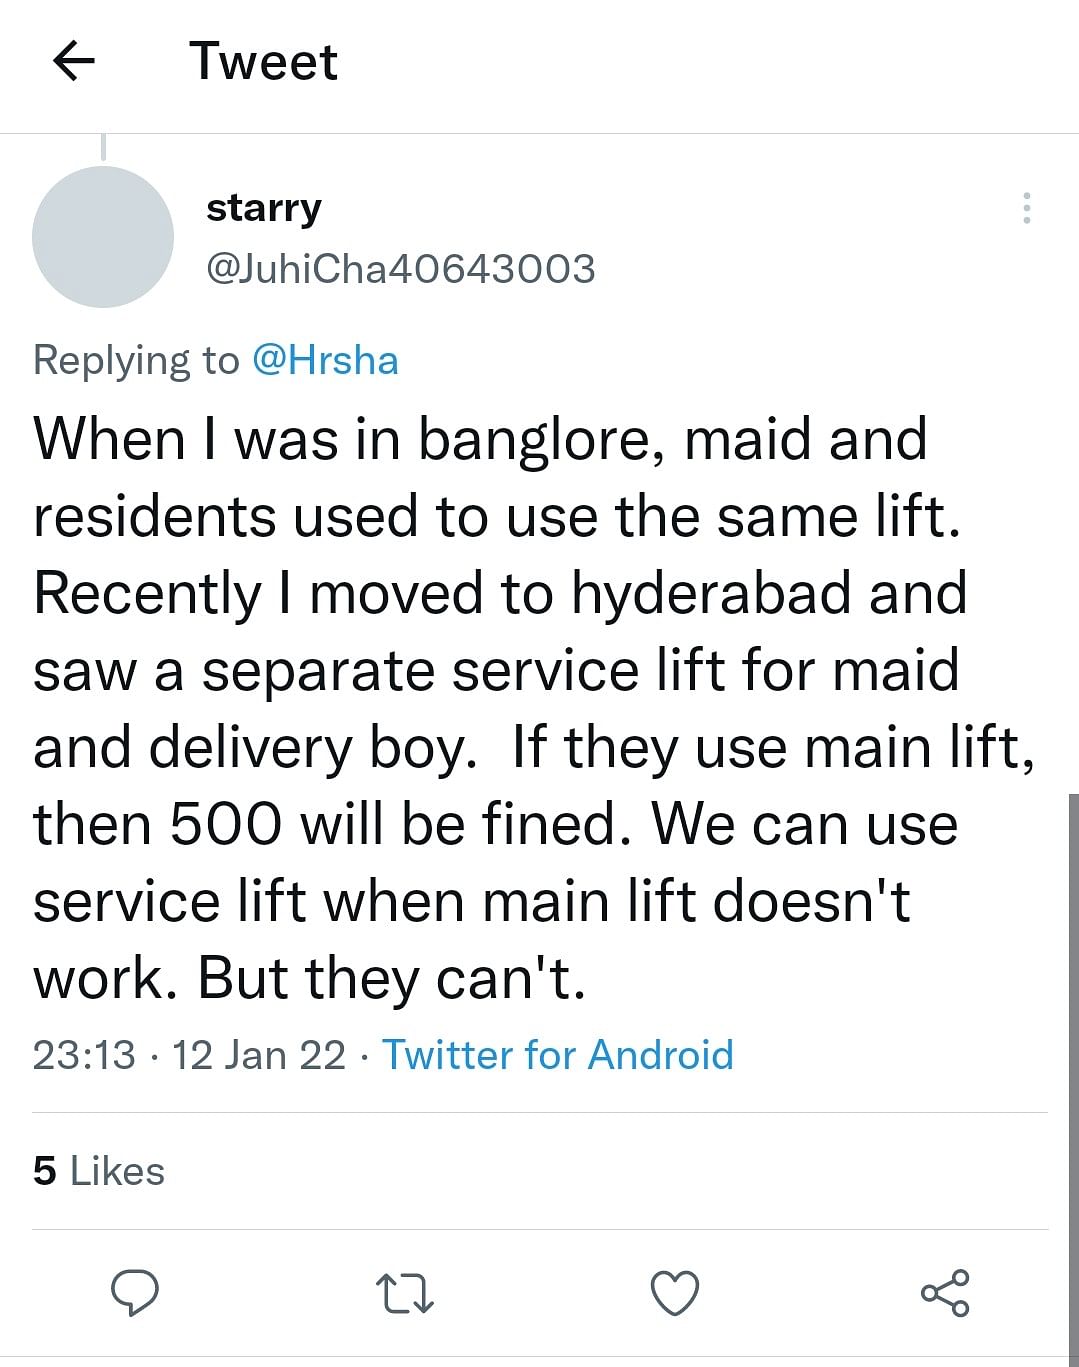 A housing society in Hyderabad announced it would fine Rs 300 to maids and delivery persons for using the lift.